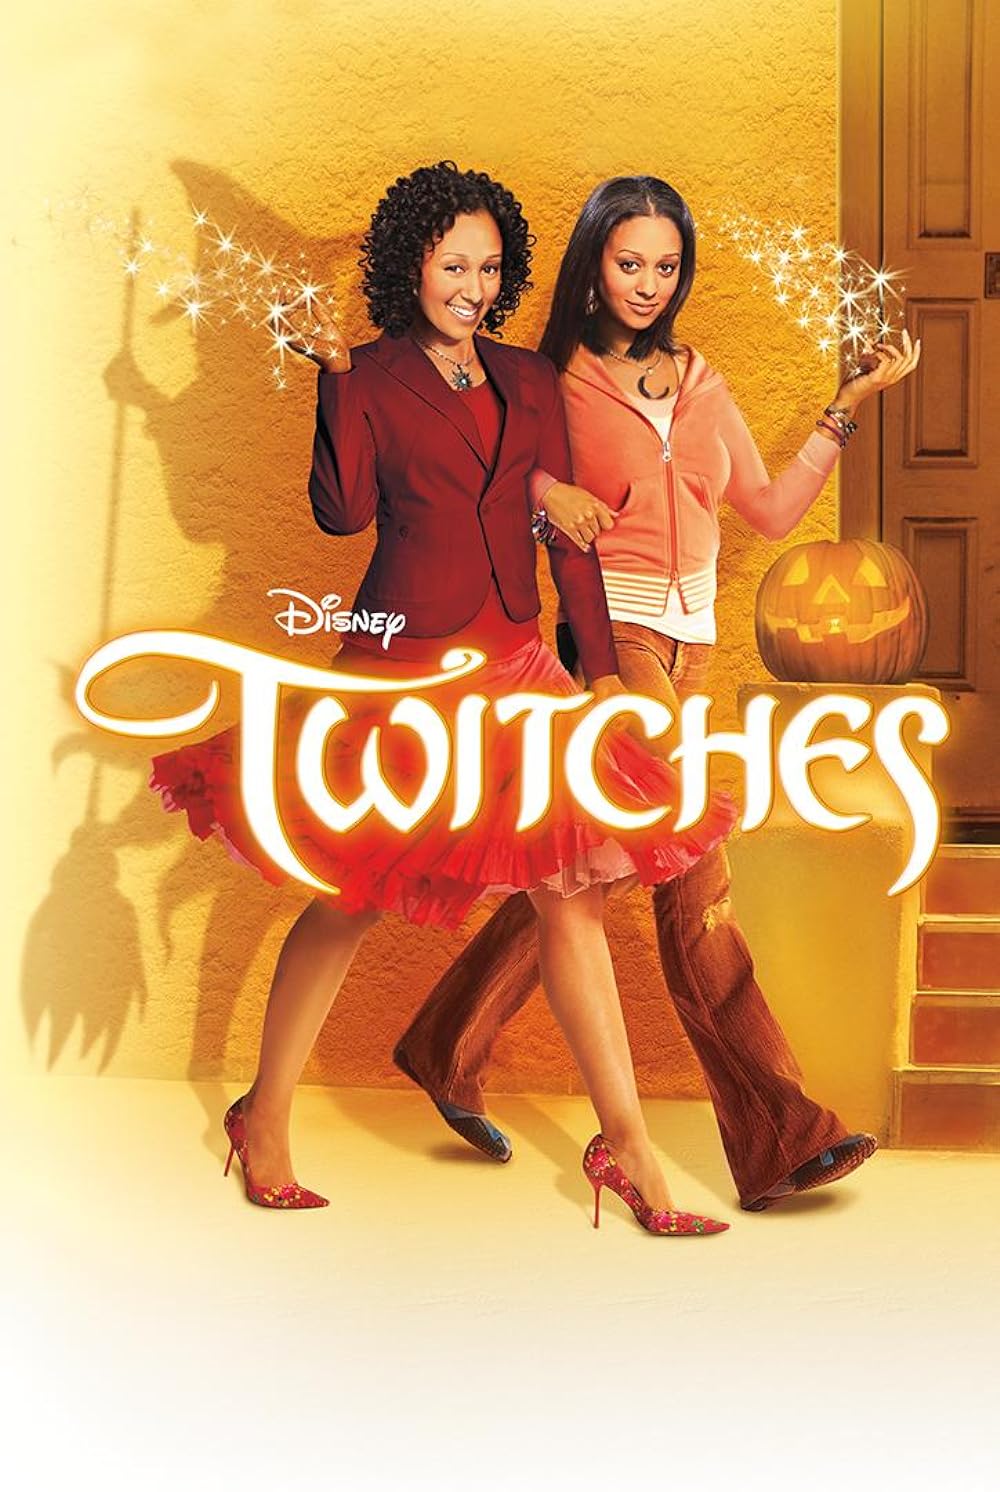 casey mcguigan recommends Twitches Full Movie Dailymotion